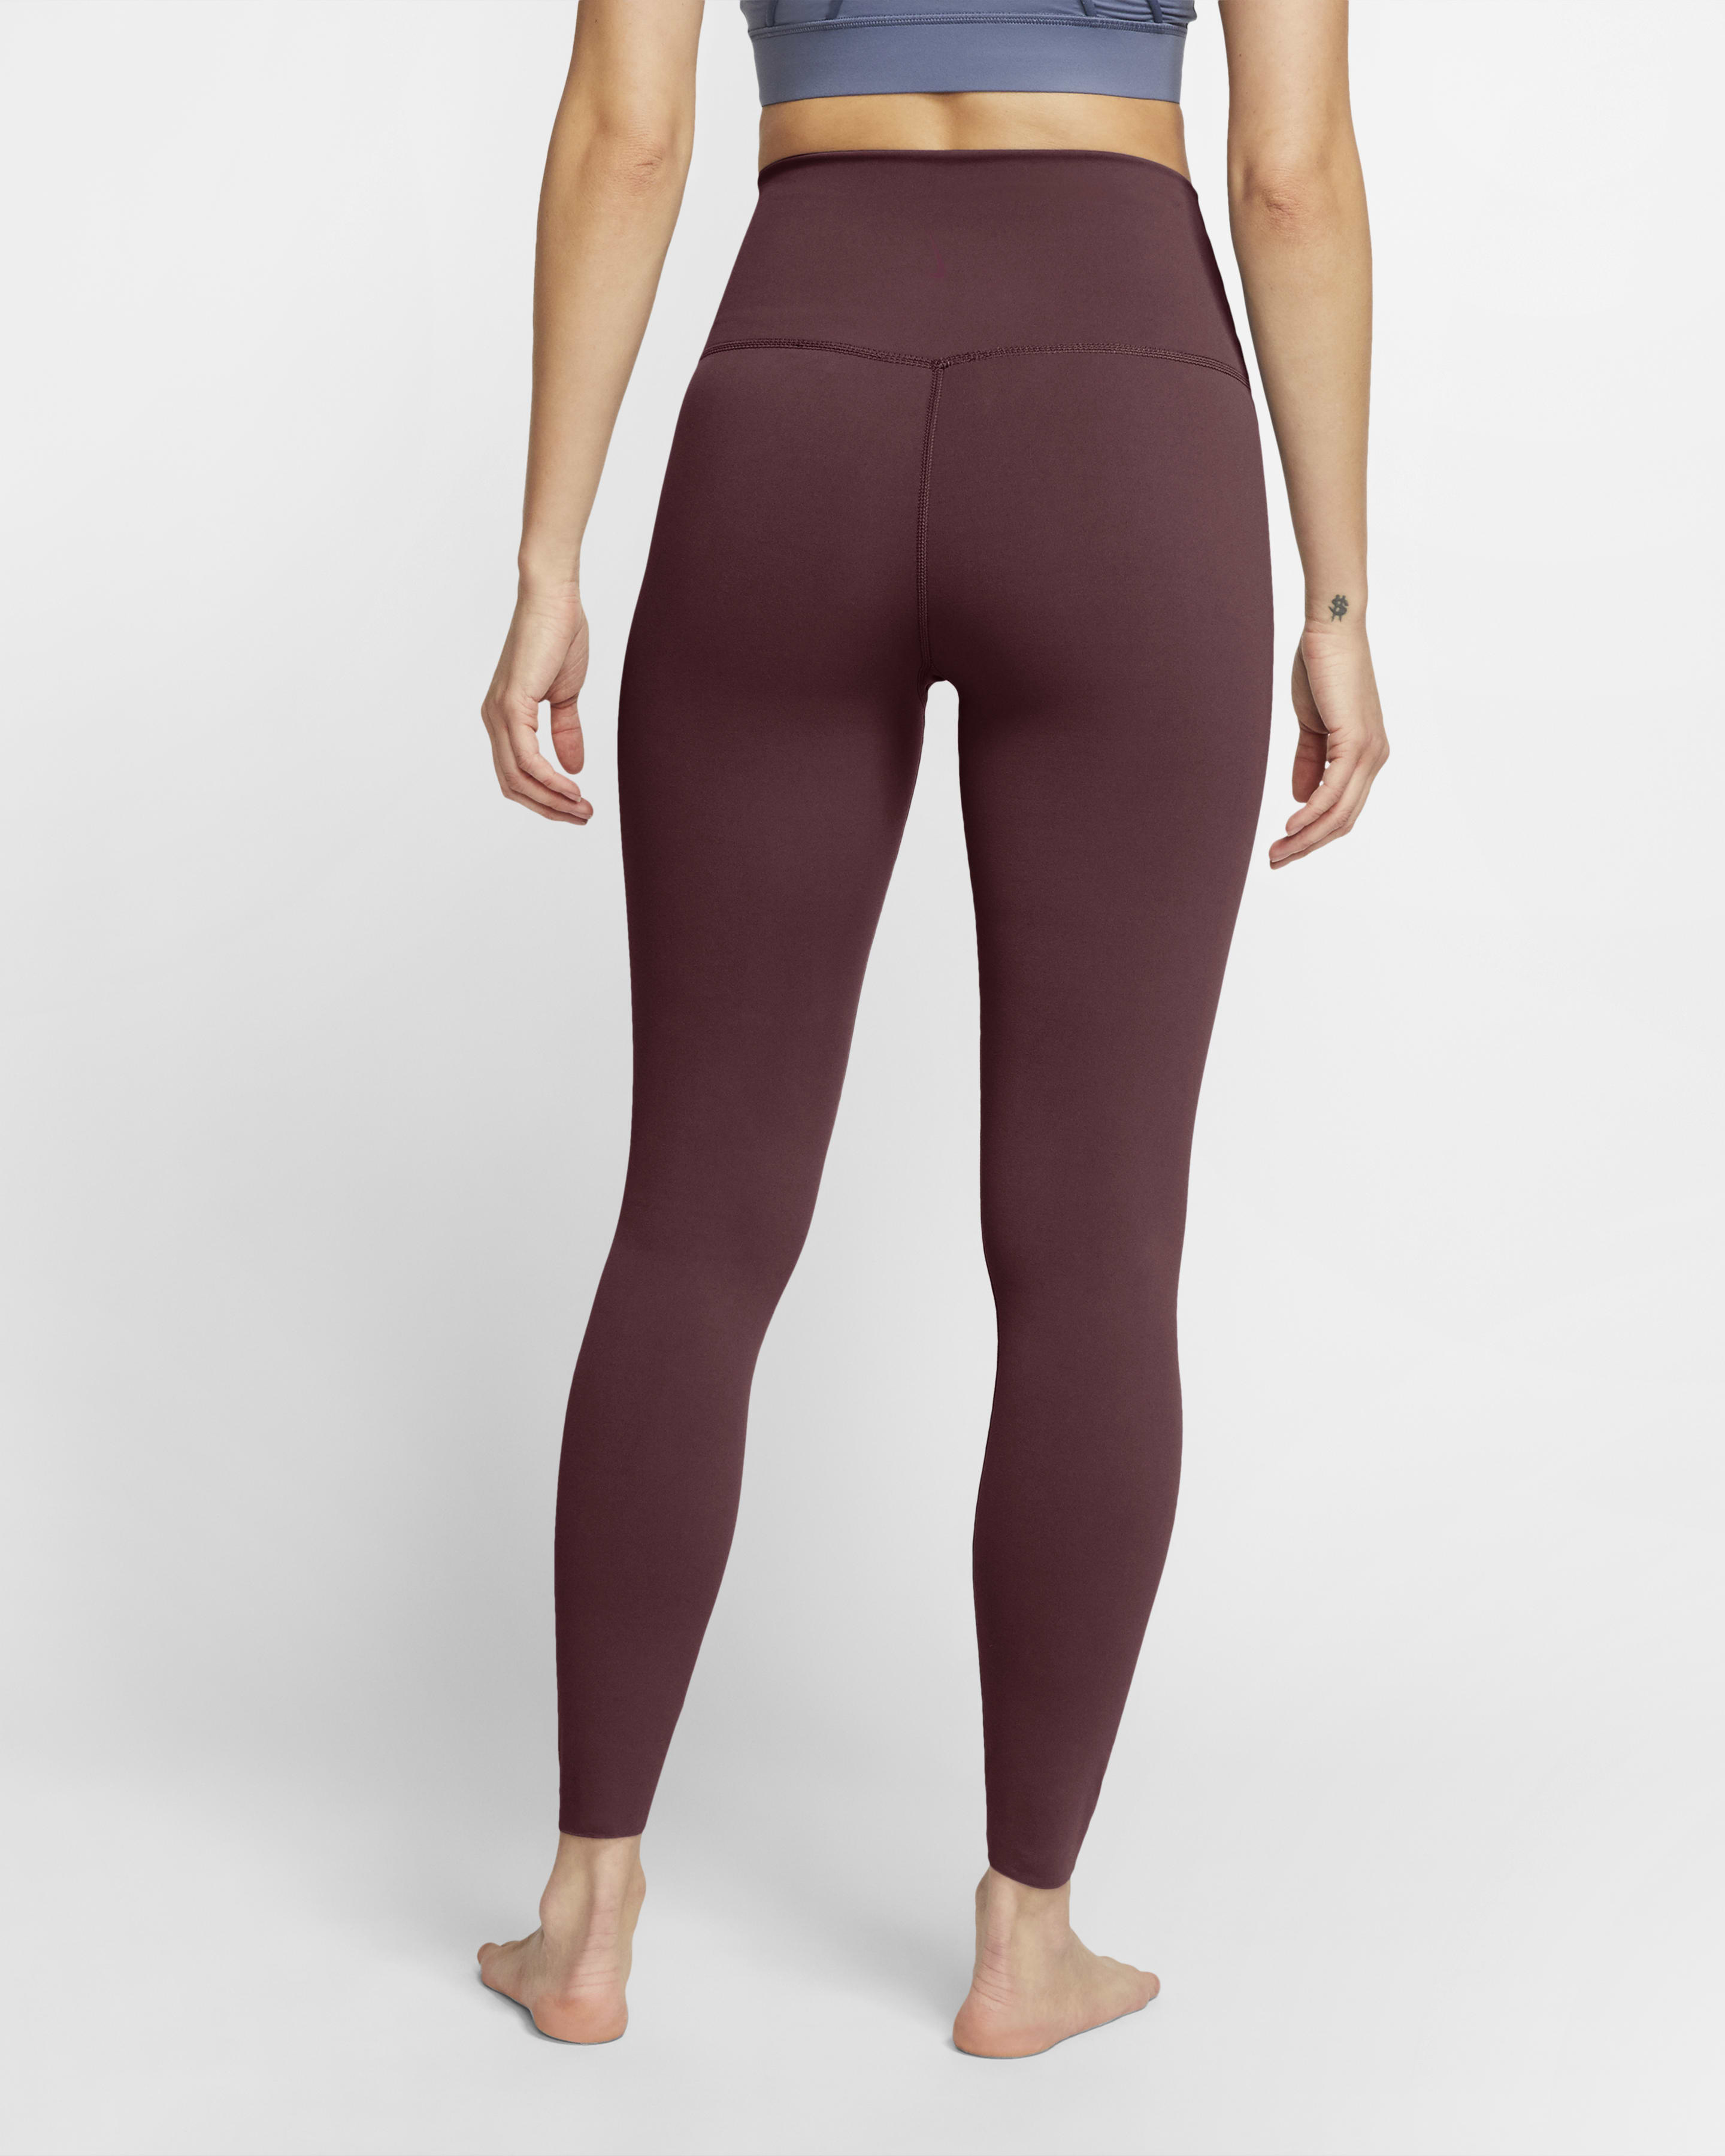  MIER Yoga Workout Leggings for Women with Inside